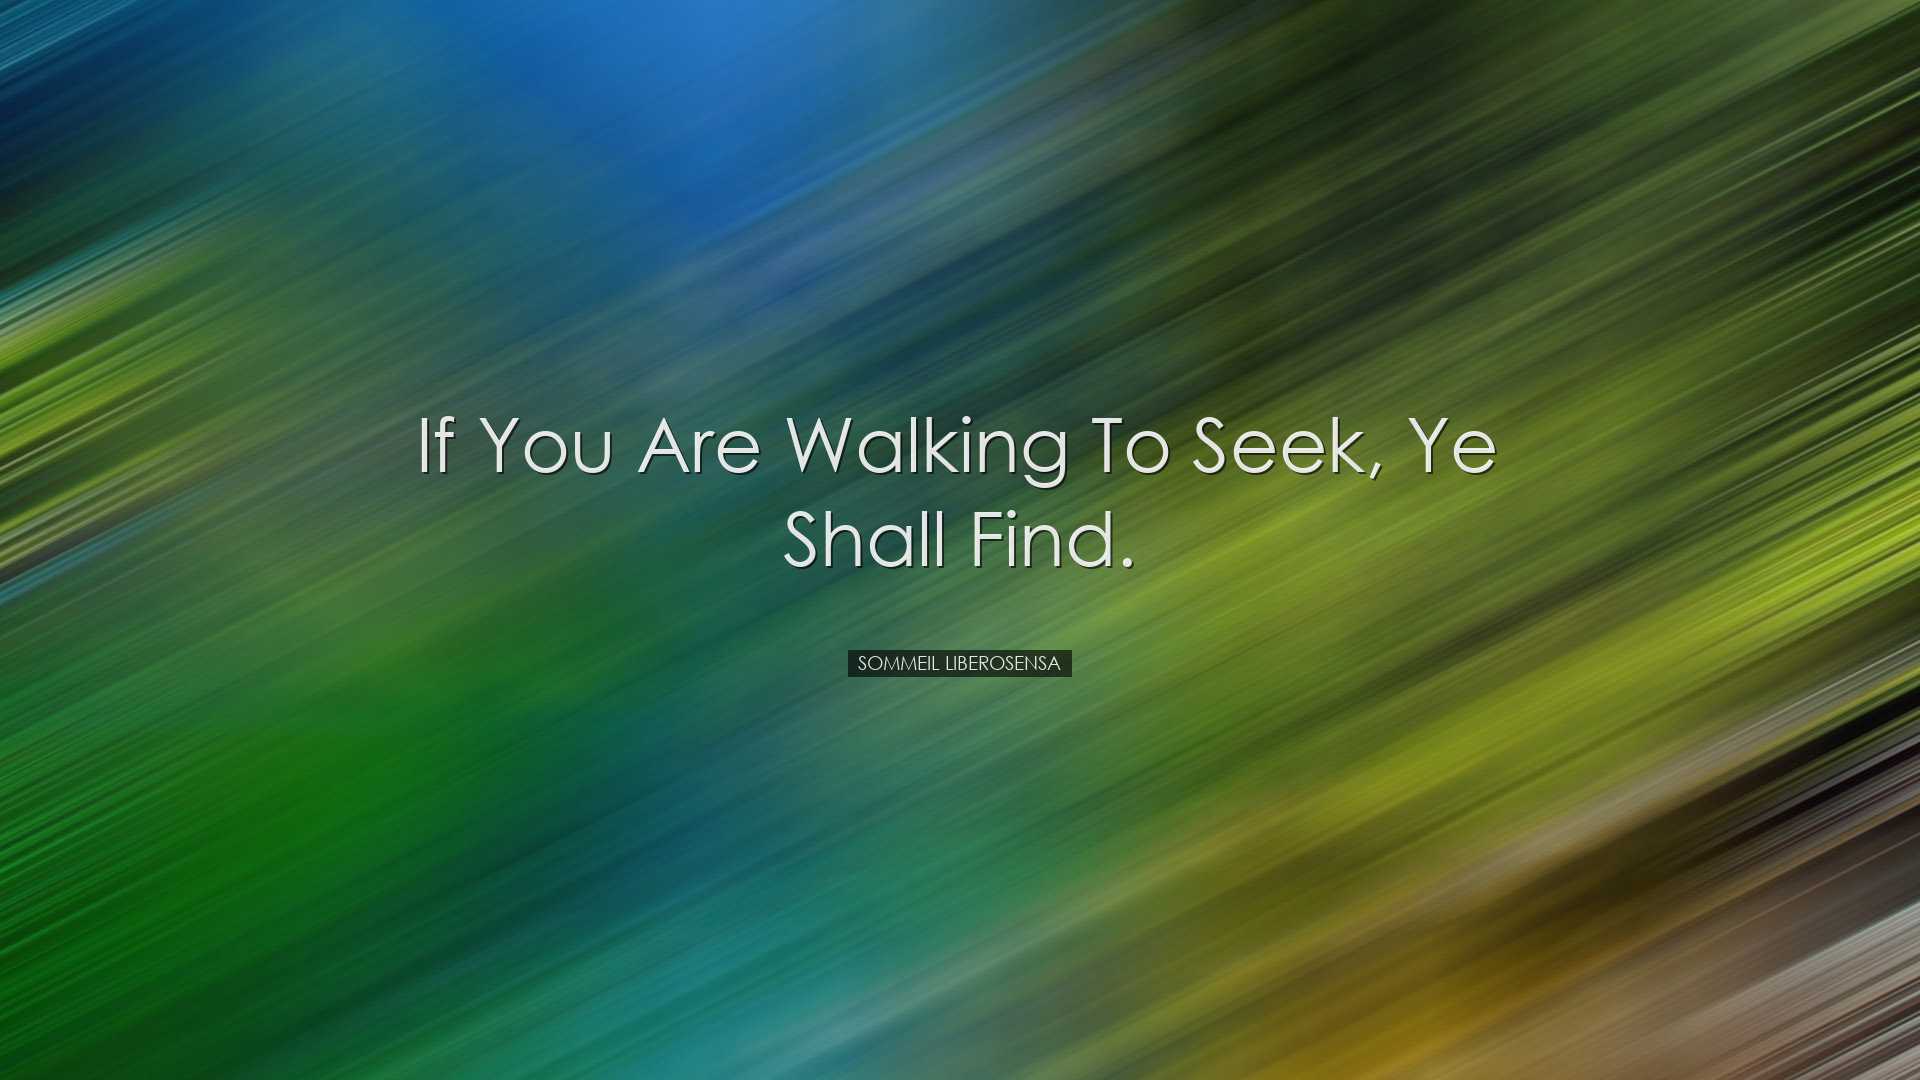 If you are walking to seek, ye shall find. - Sommeil Liberosensa